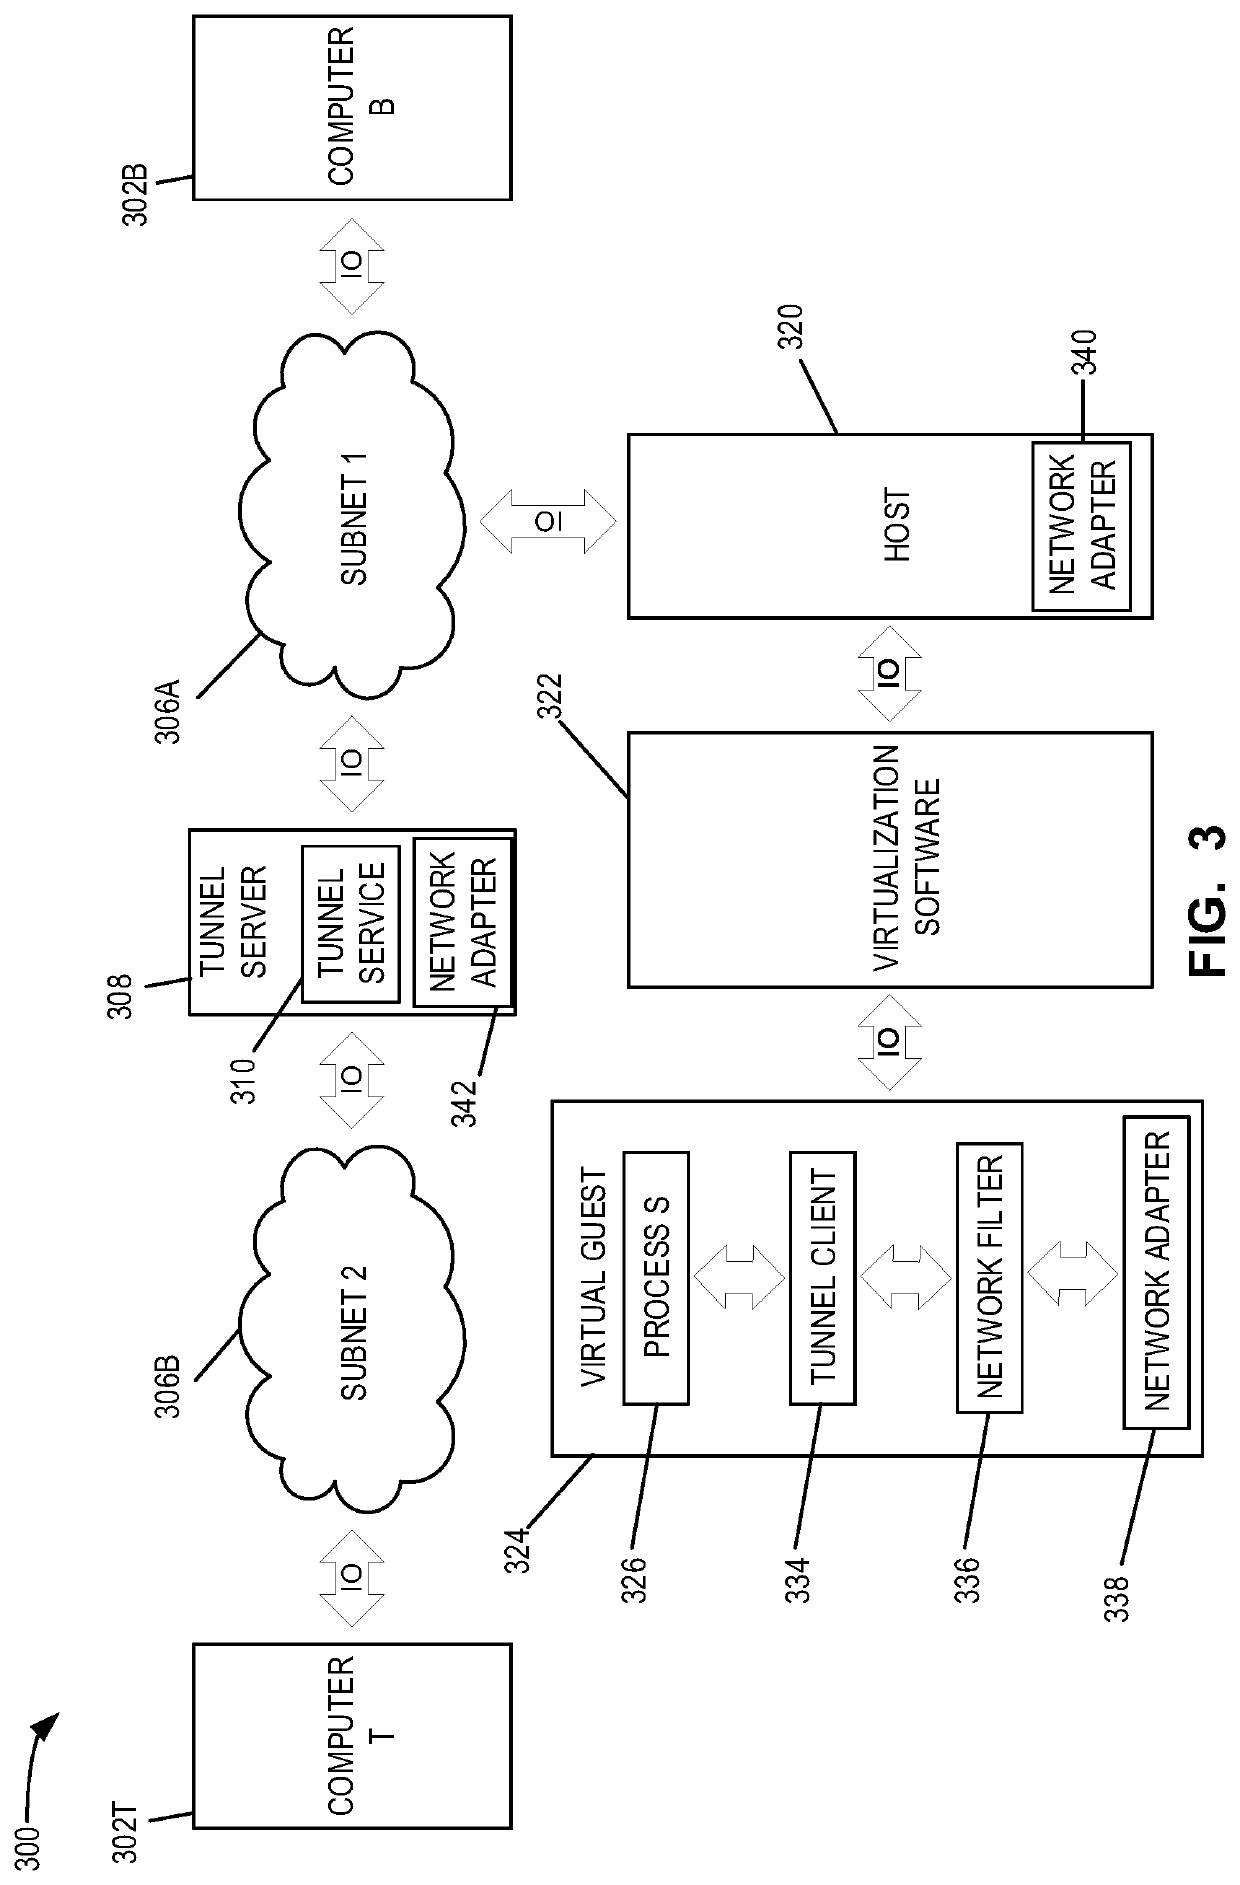 Method and system for creating quarantined workspaces through controlled interaction between a host and virtual guests